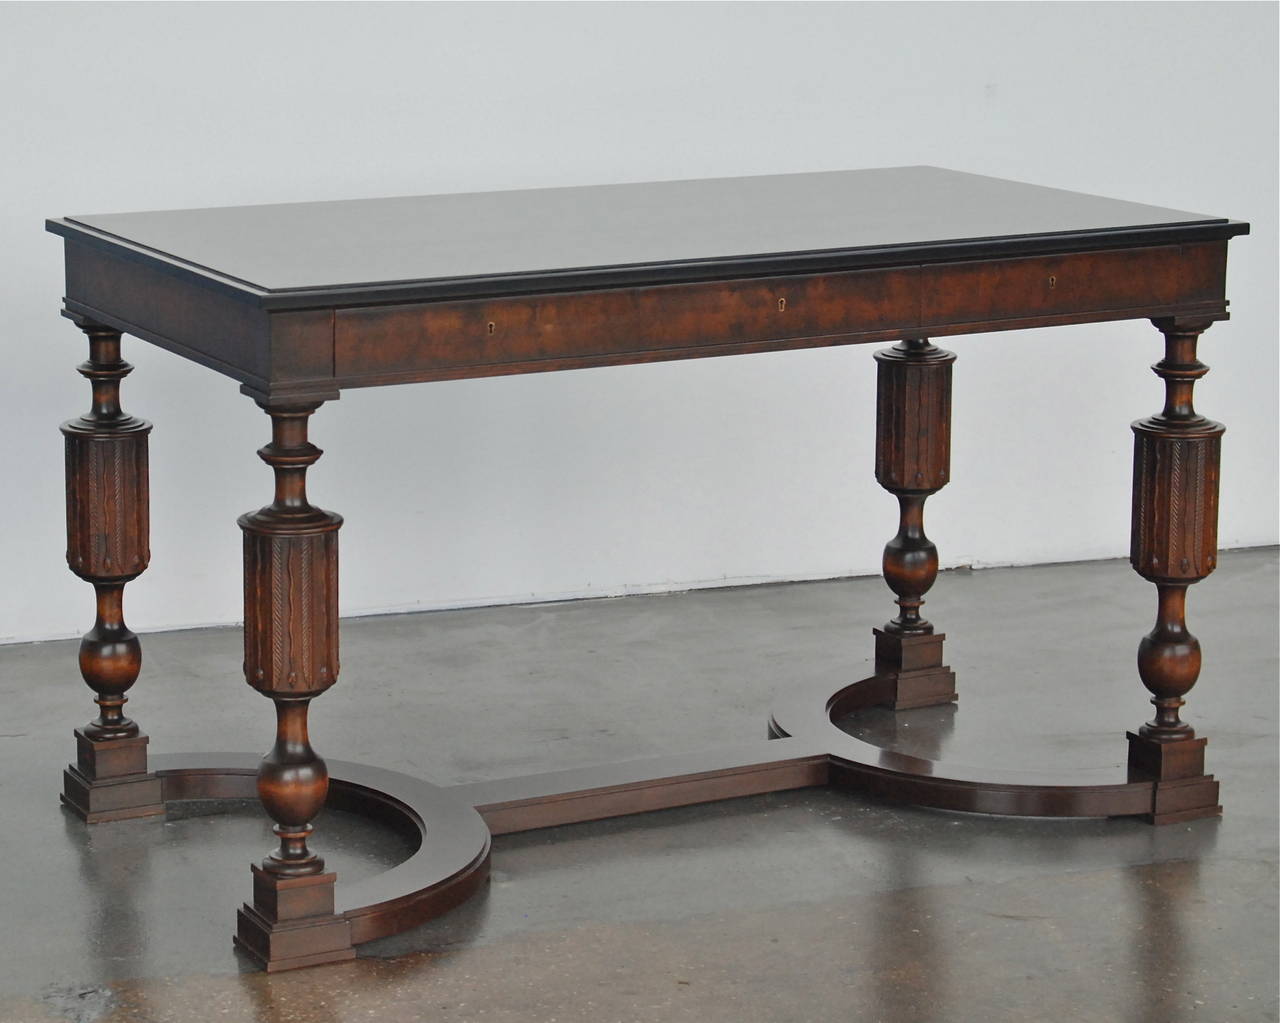 A desk or center table by Axel Einar Hjorth for Nordiska Kompanient, Sweden, circa 1930. The model Library, was designed in 1927 and presented at NK's exhibition in November 1928.
Stained wood with satin black tabletop. Three drawers. 
Label marked